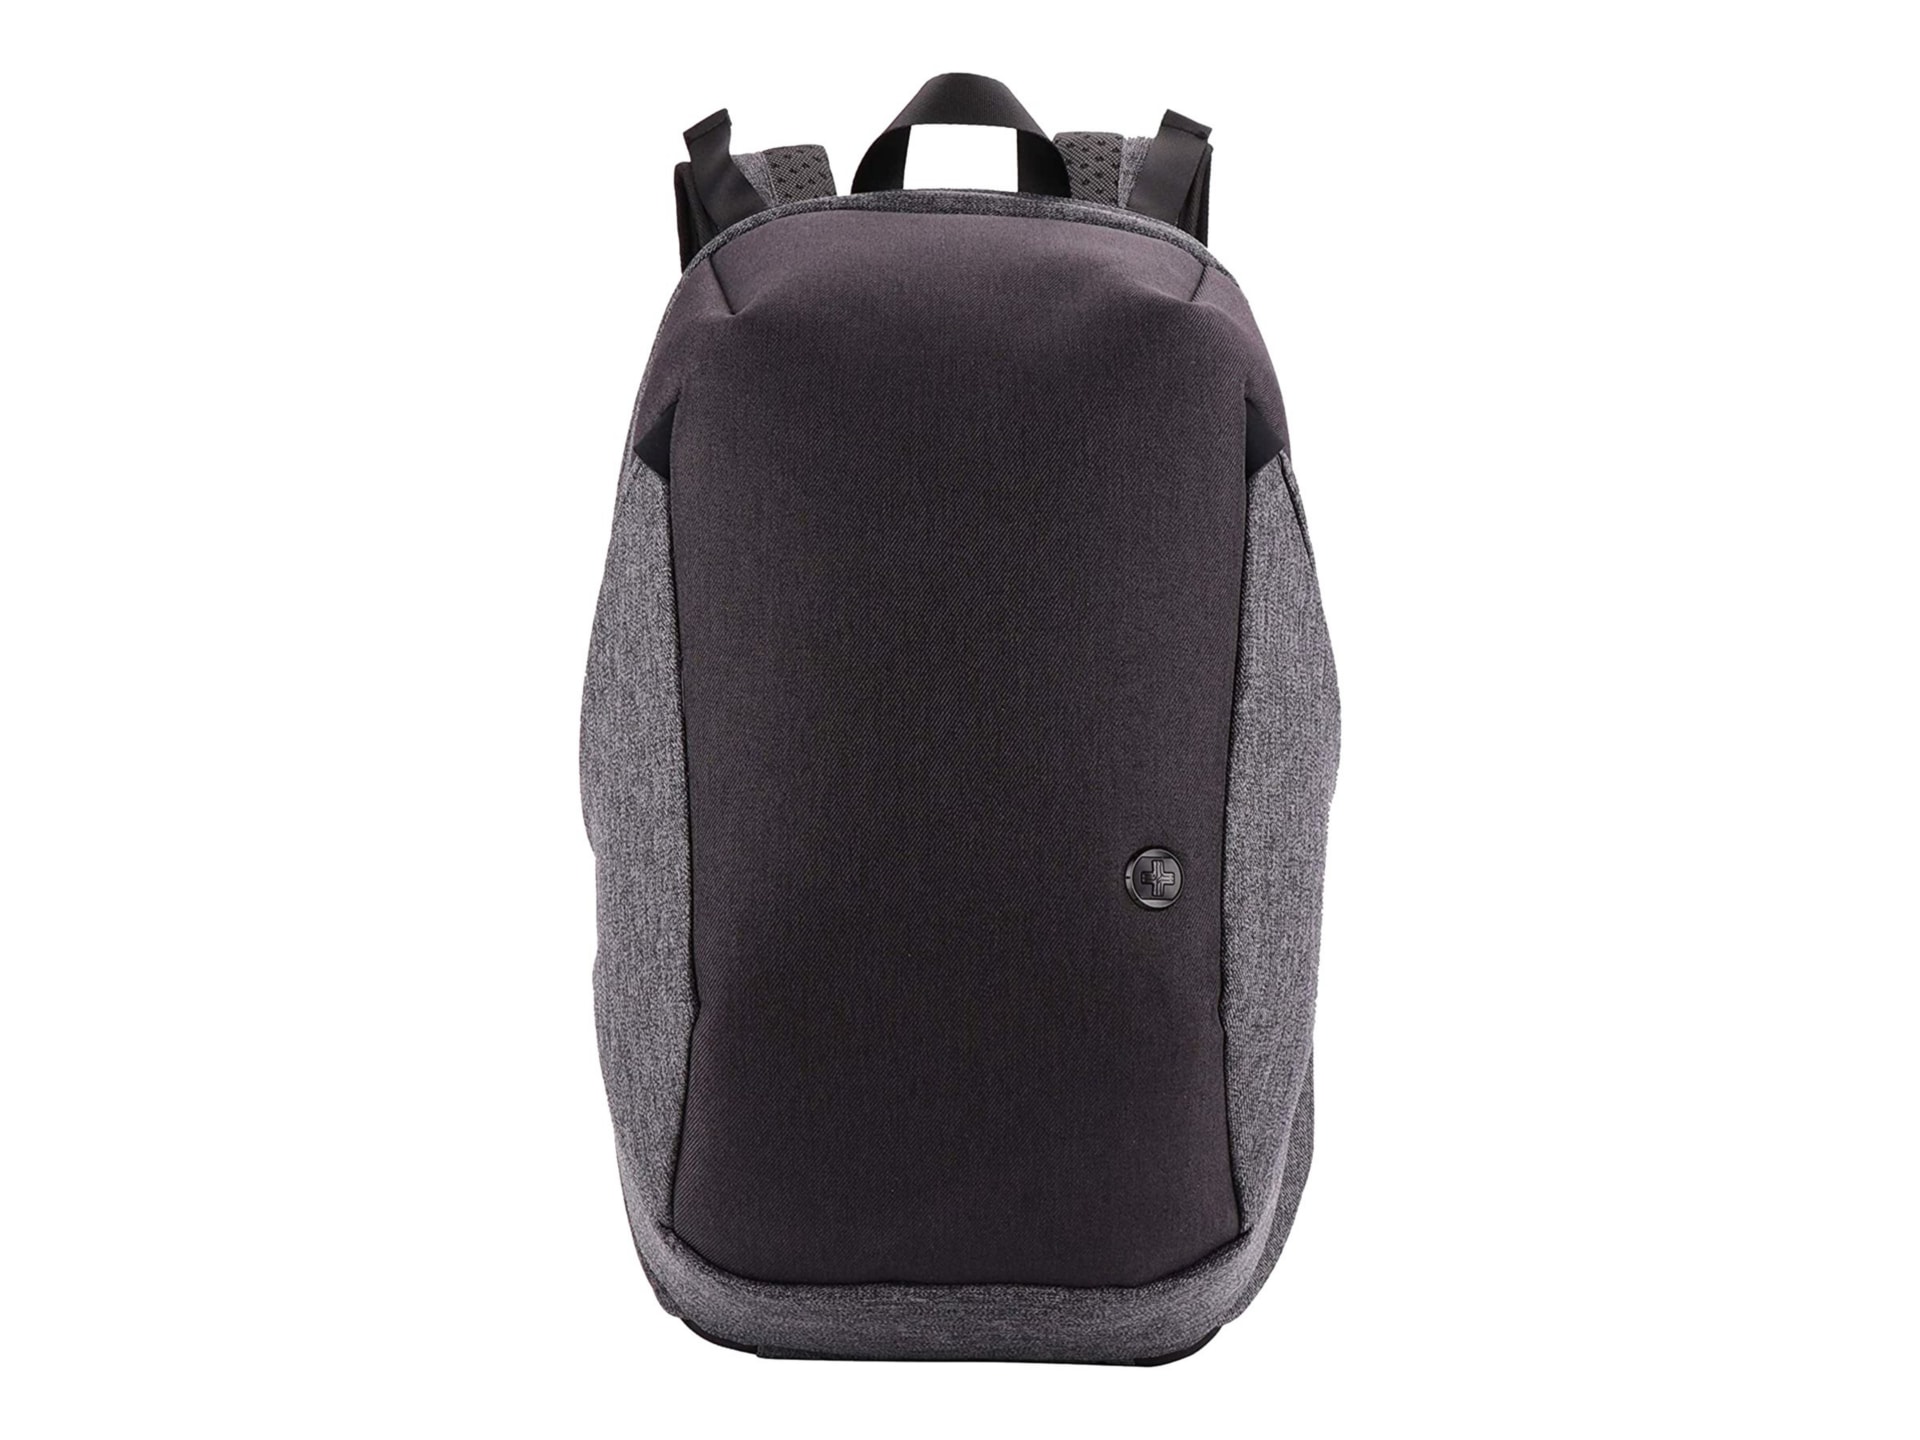 Swissdigital COSMO 3.0 Massage SD1514M Carrying Case Backpack